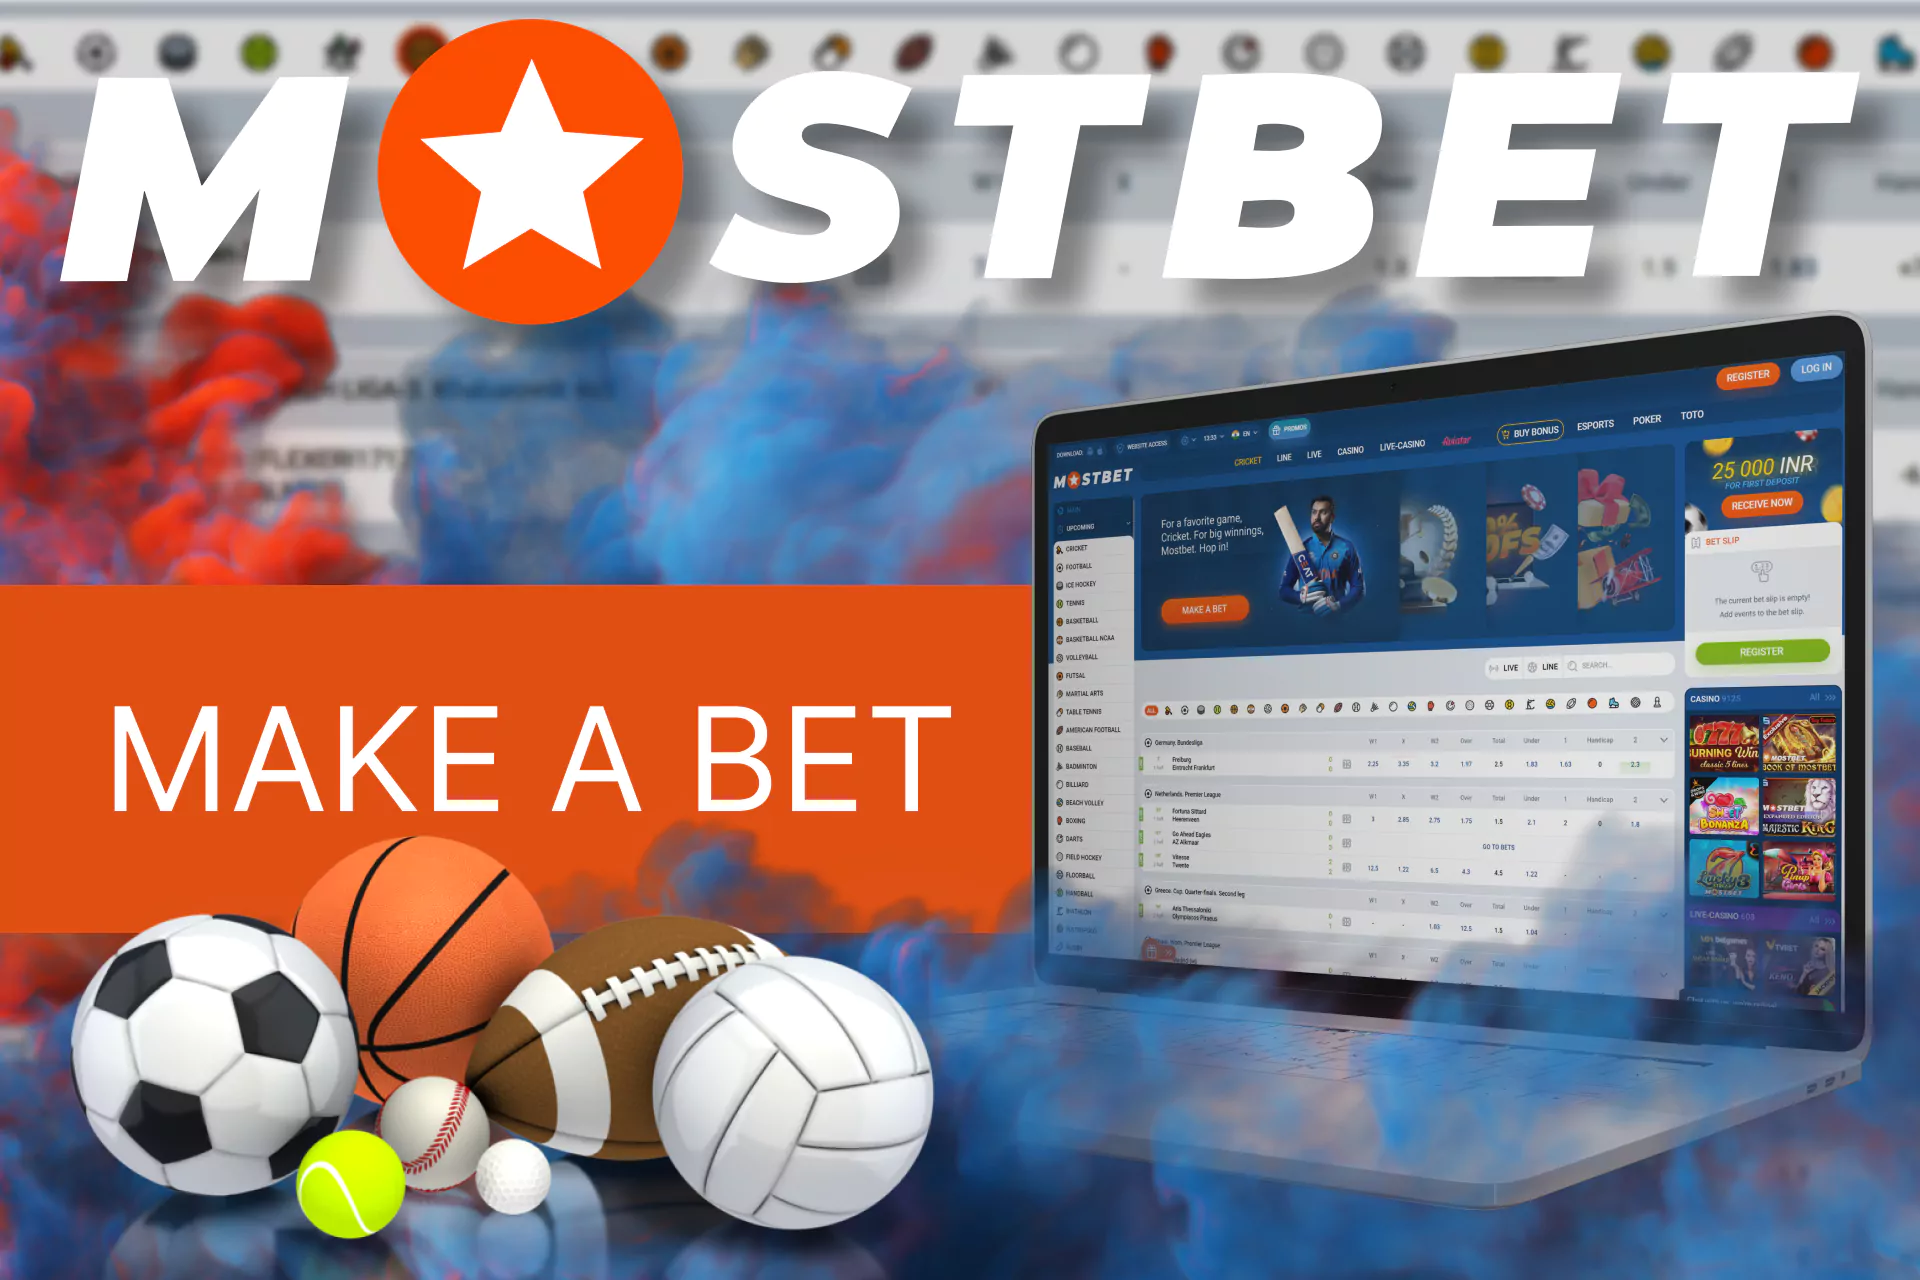 In addition to tennis, bet on any other sports on Mostbet.